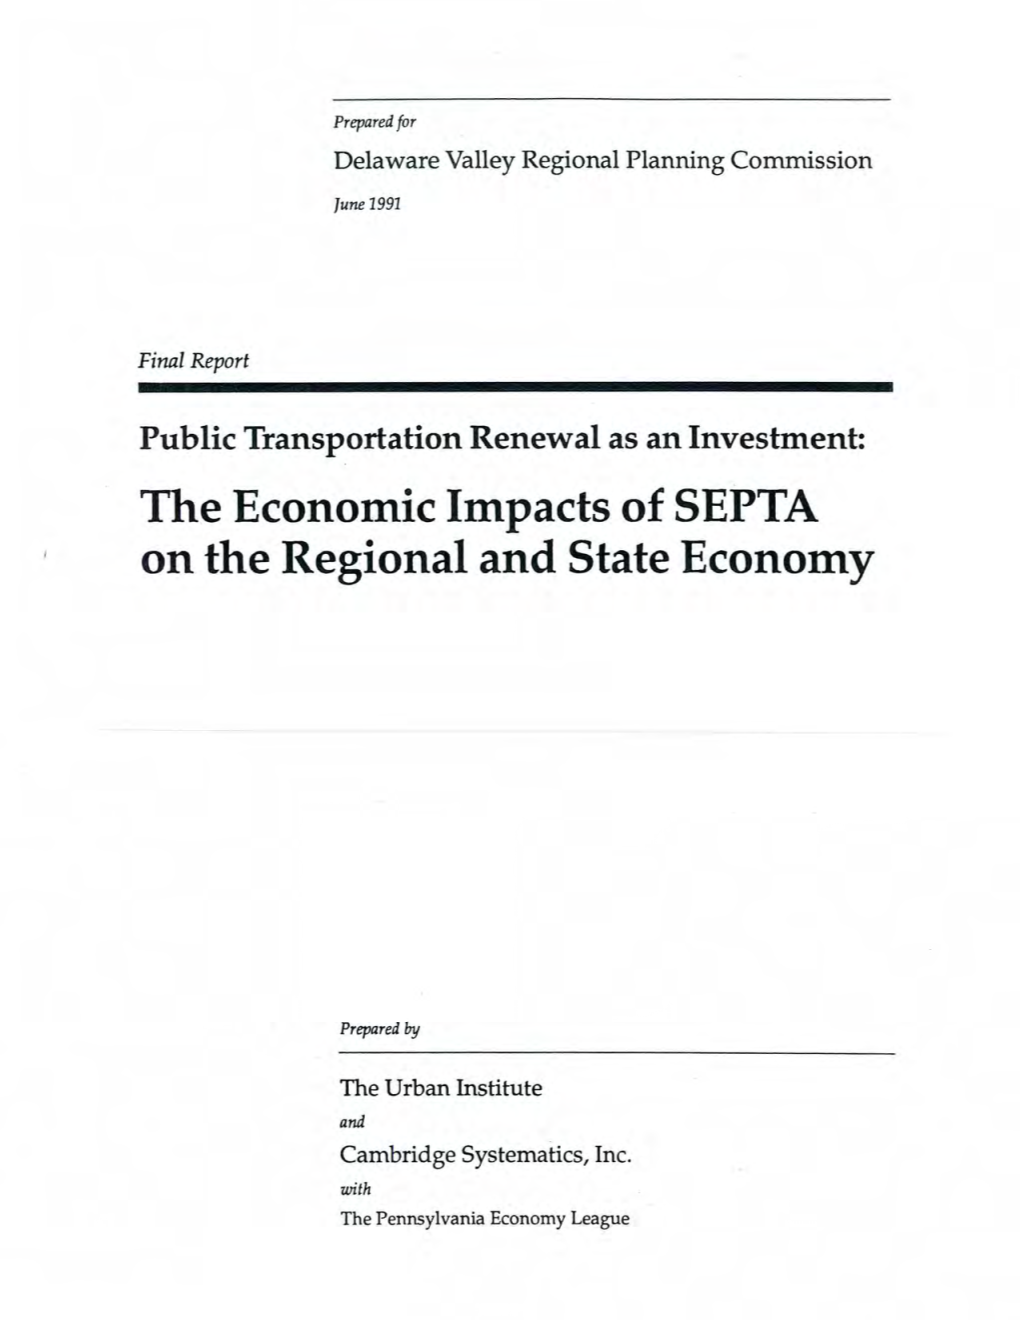 The Econolllic Illlpacts of SEPTA on the Regional and State Econotny